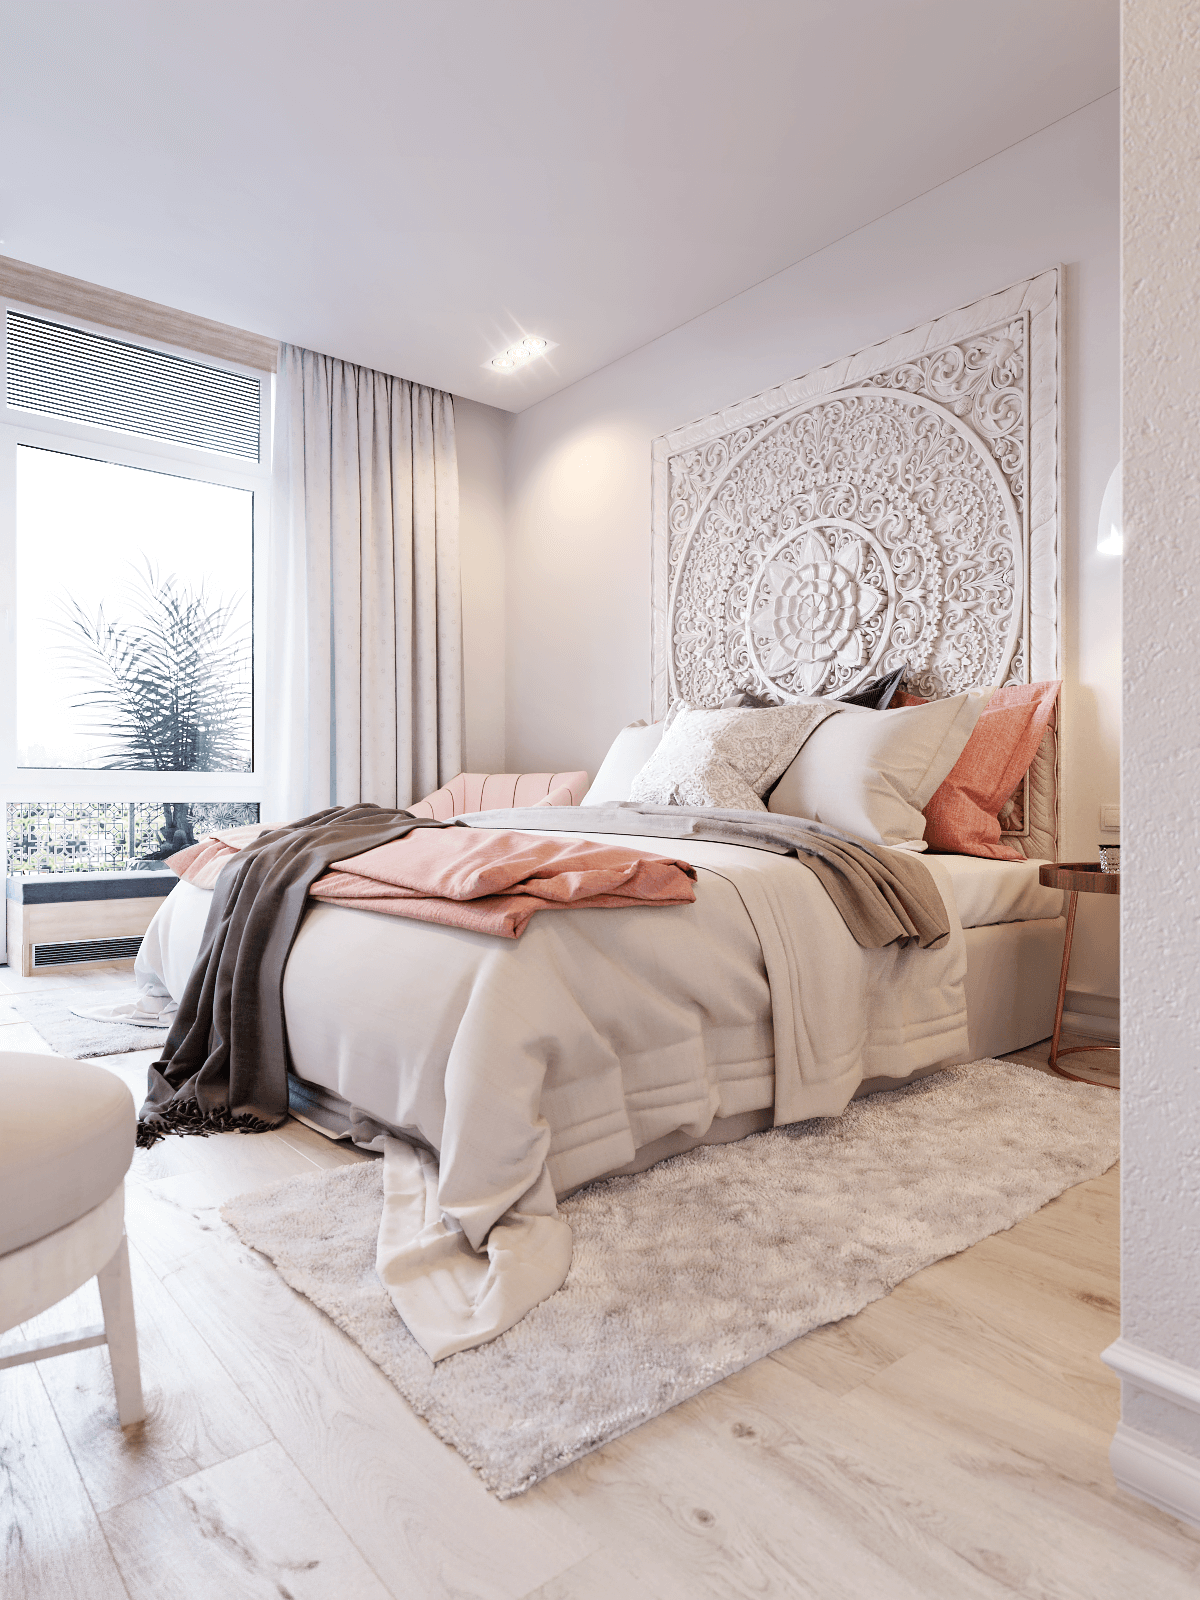 25+ Best Bedroom Wall Decor Ideas and Designs for 2020